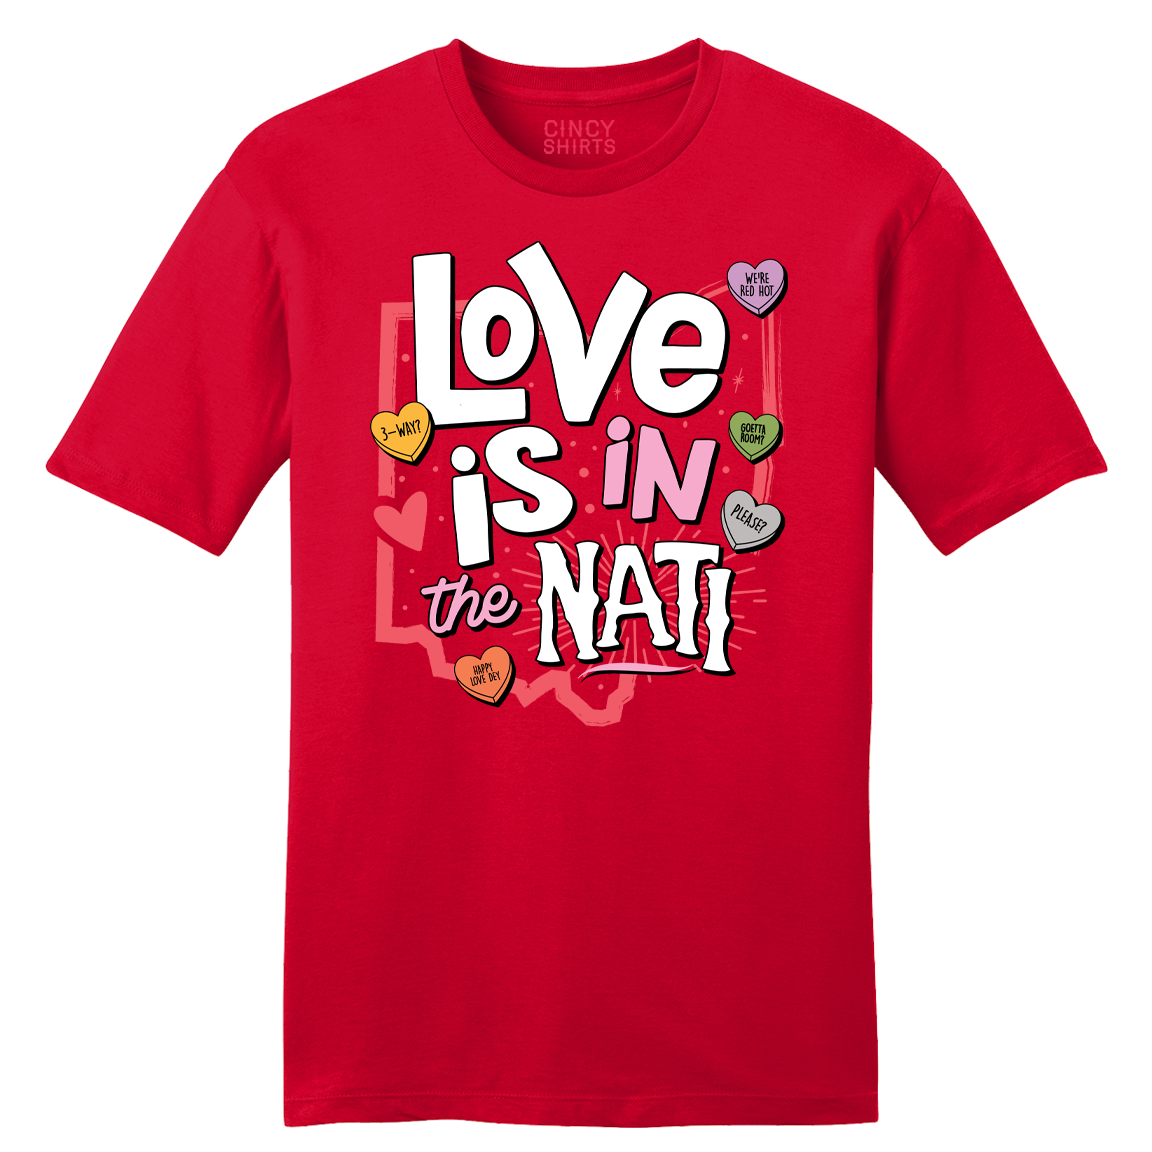 Love Is In The Nati - Cincy Shirts